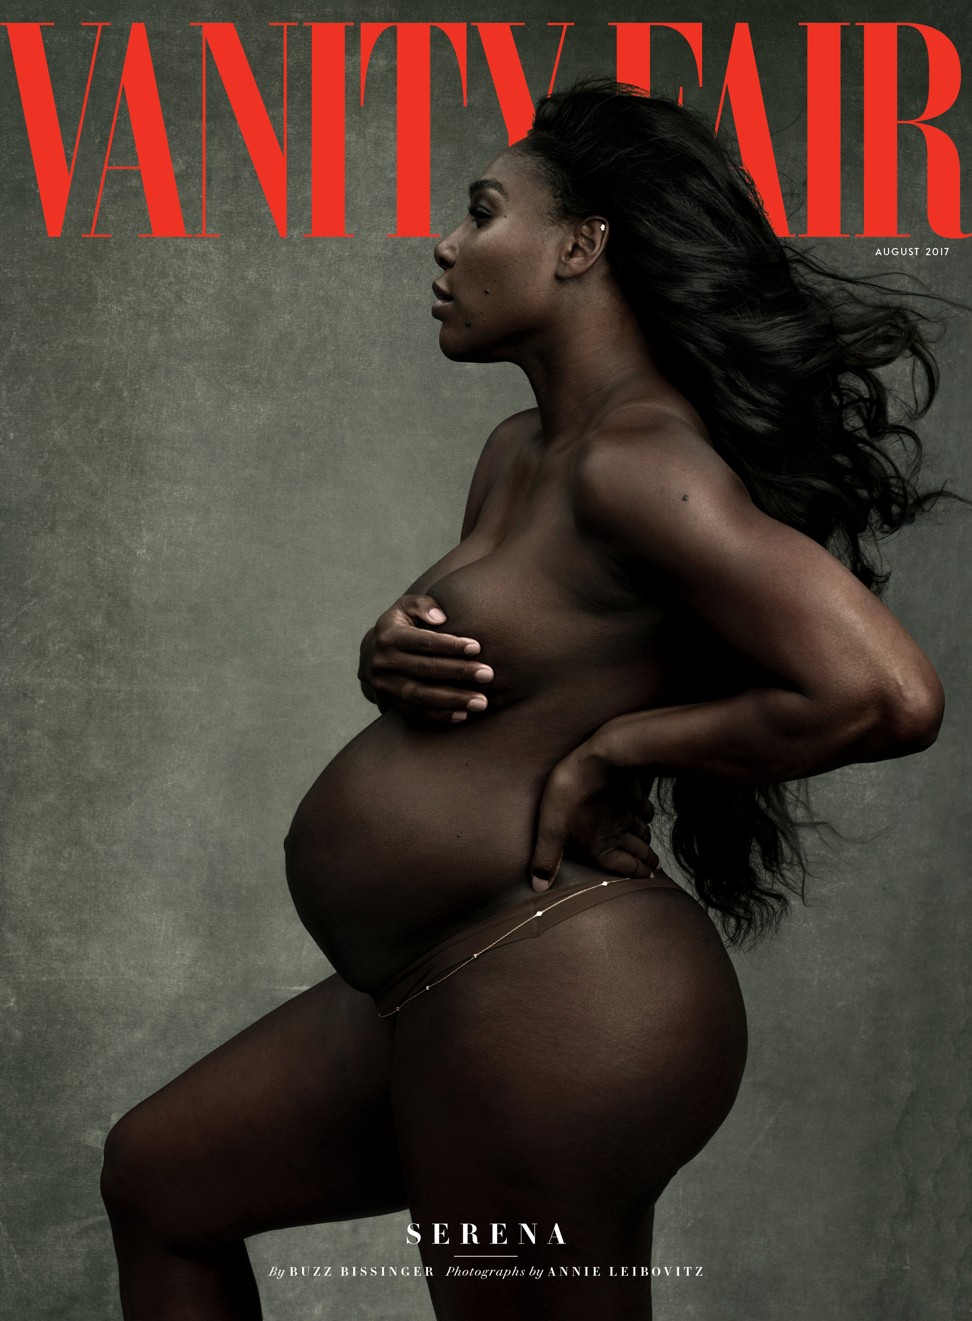 A pregnant Serena Williams poses in a Vanity Fair cover photograph by Annie Liebovitz released June 27, 2017. Annie Leibovitz exclusively for Vanity Fair/Handout via Reuters